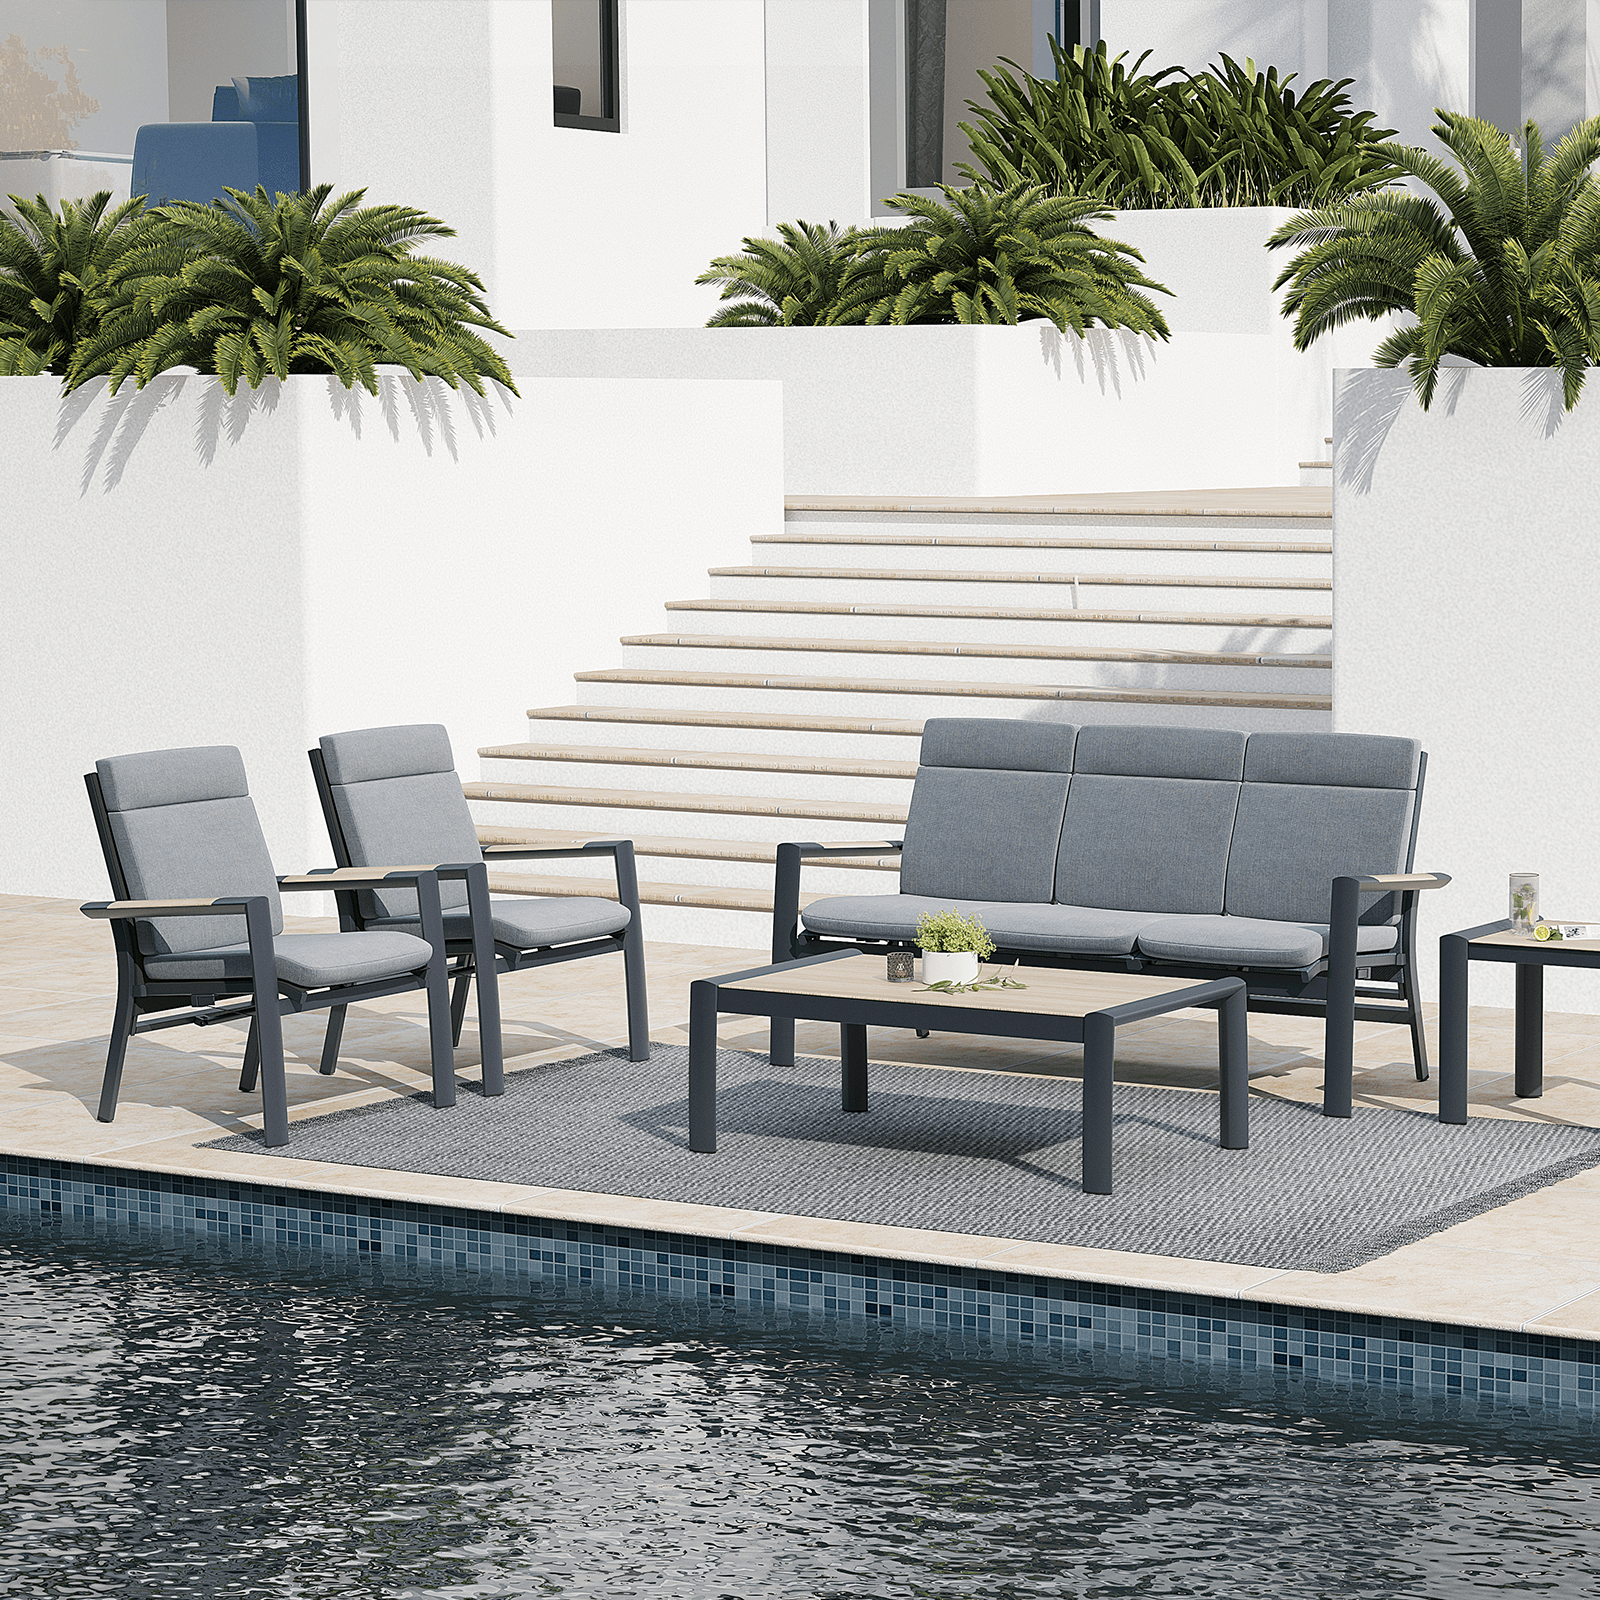 Capri 5-Piece grey aluminum outdoor conversation set with grey cushions, 1 three-seater sofa with adjustable backrest, 2 armchairs with adjustable backrest, 1 rectangle coffee table, 1 square side table, beside a pool- Jardina Furniture